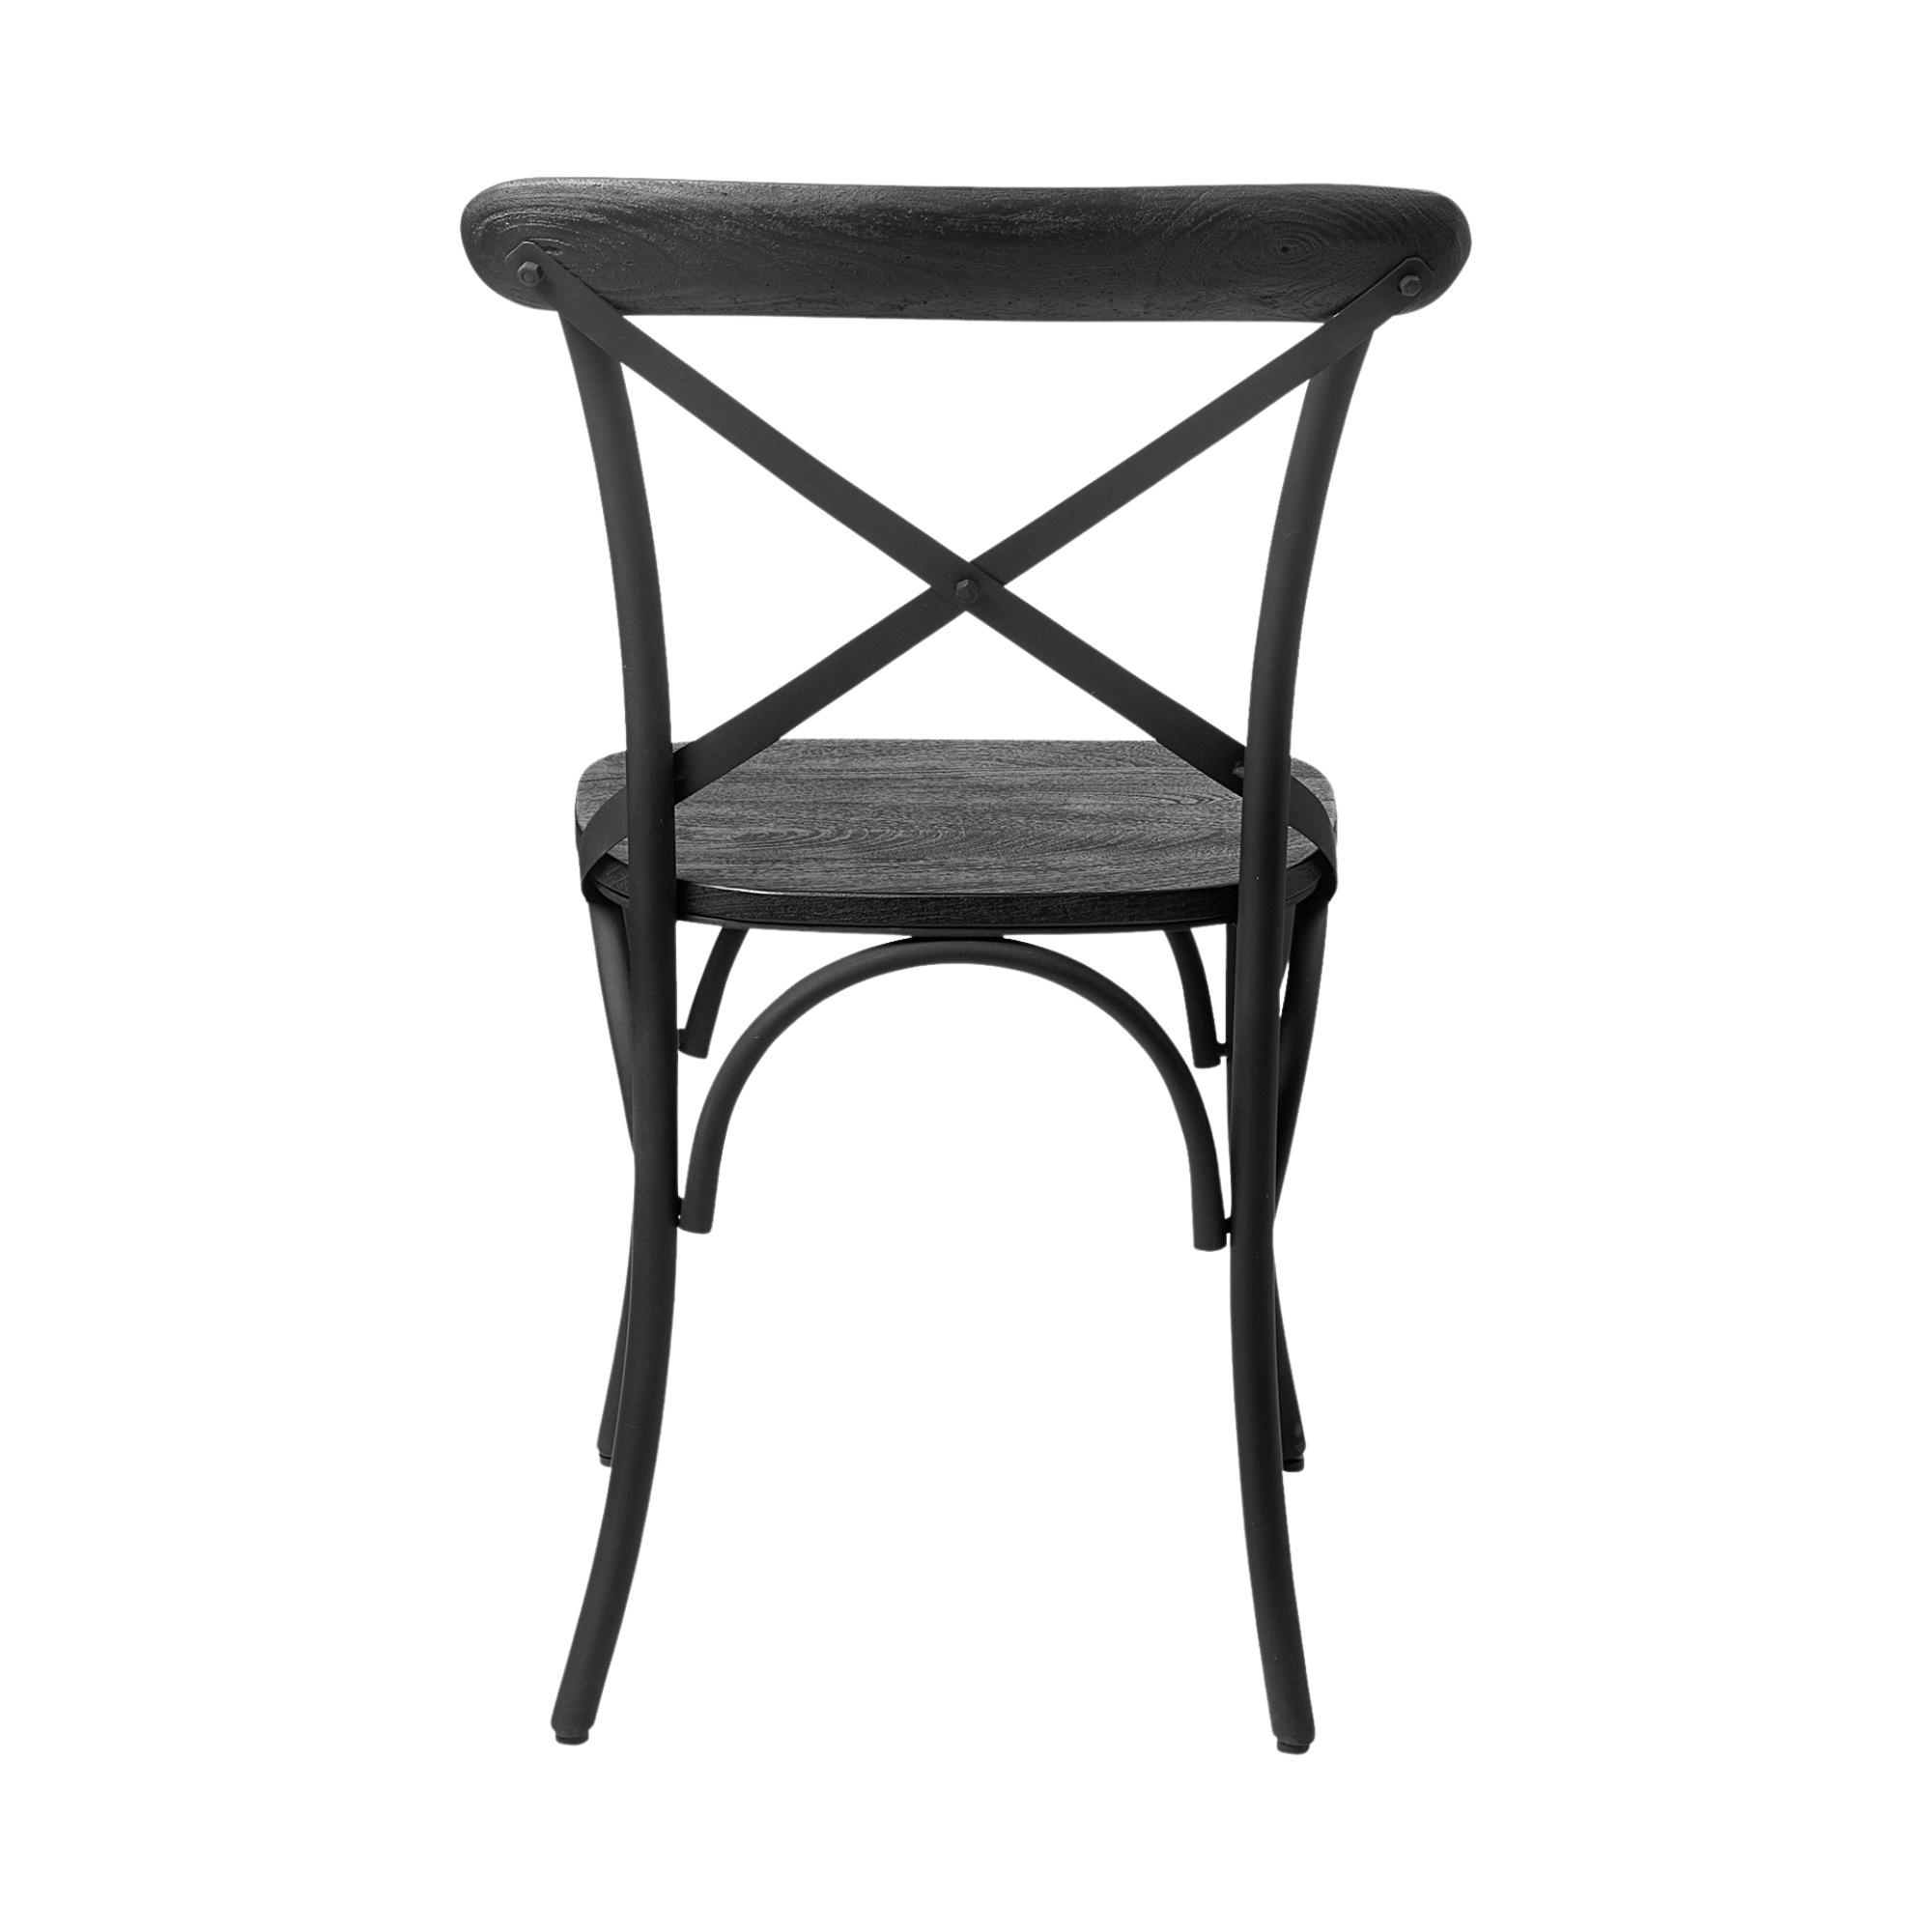 Ethany Dining Chair - Black